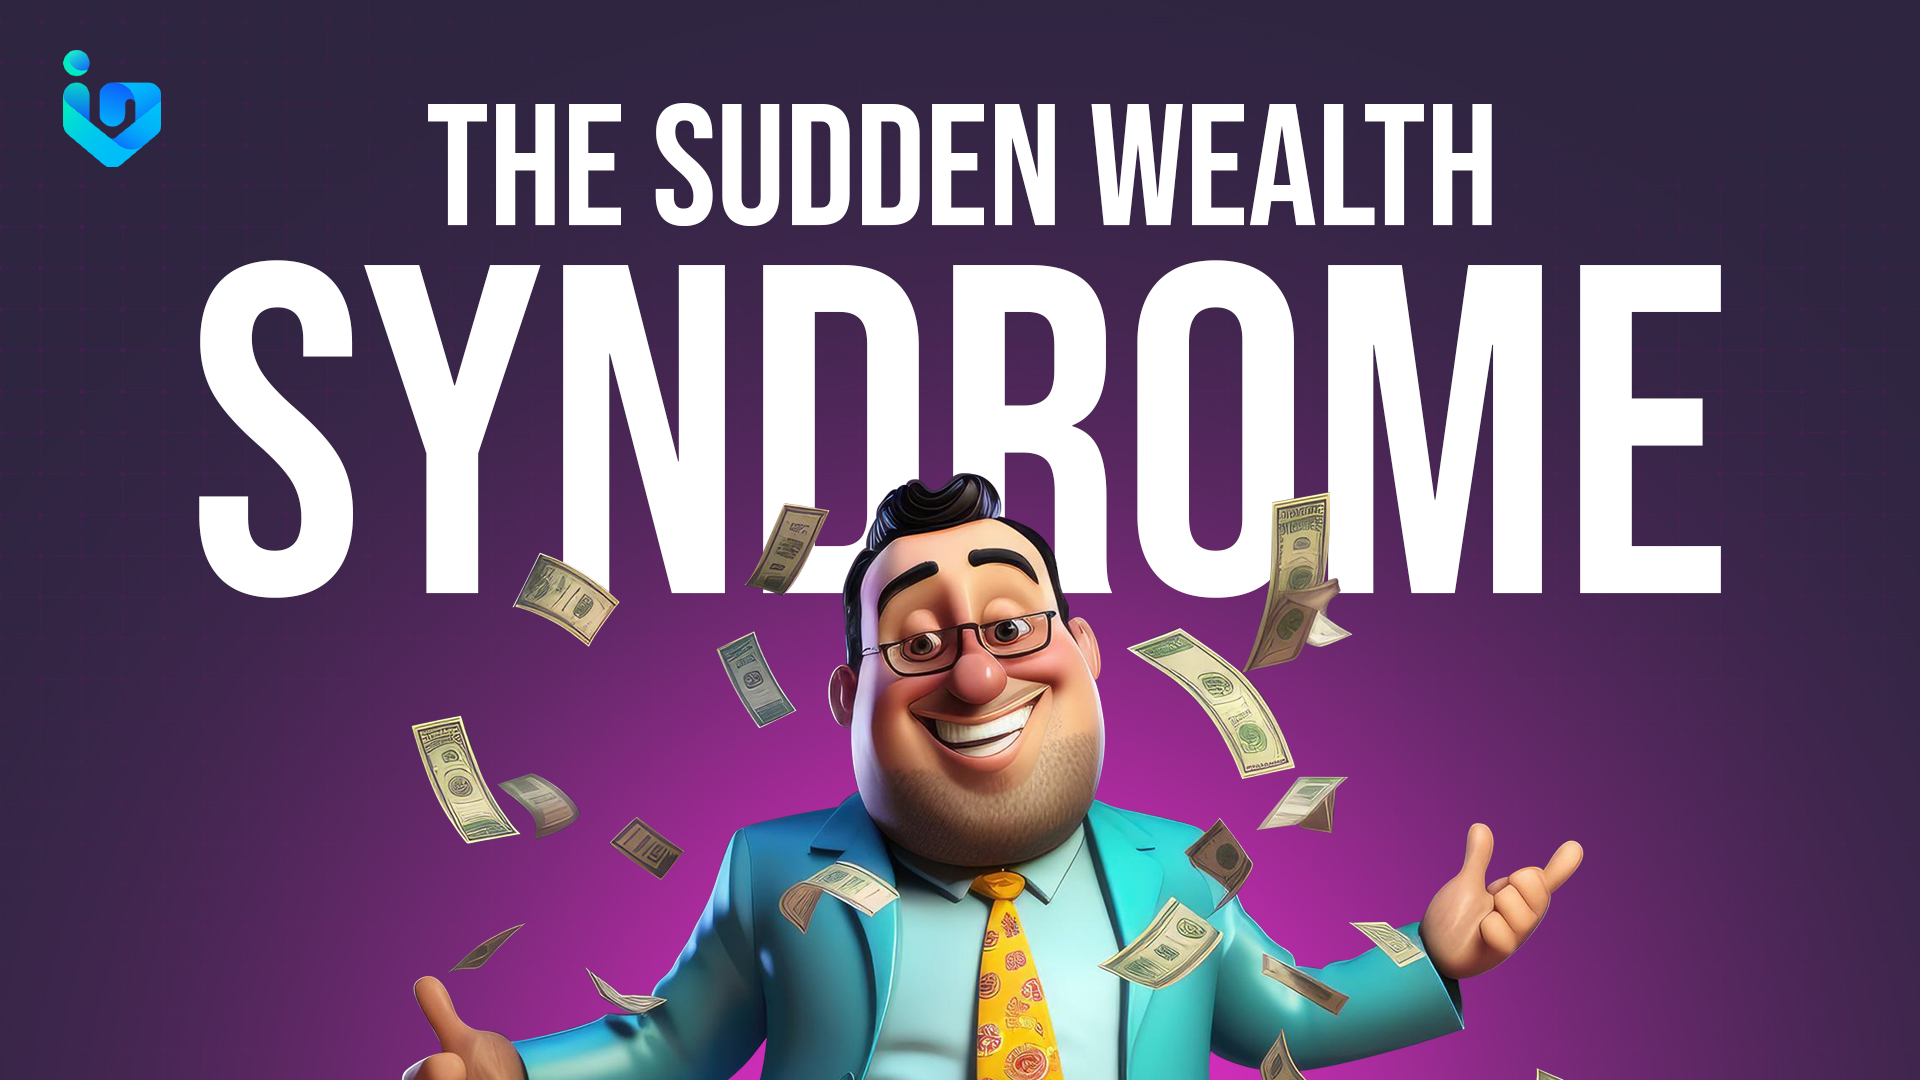 The sudden wealth syndrome